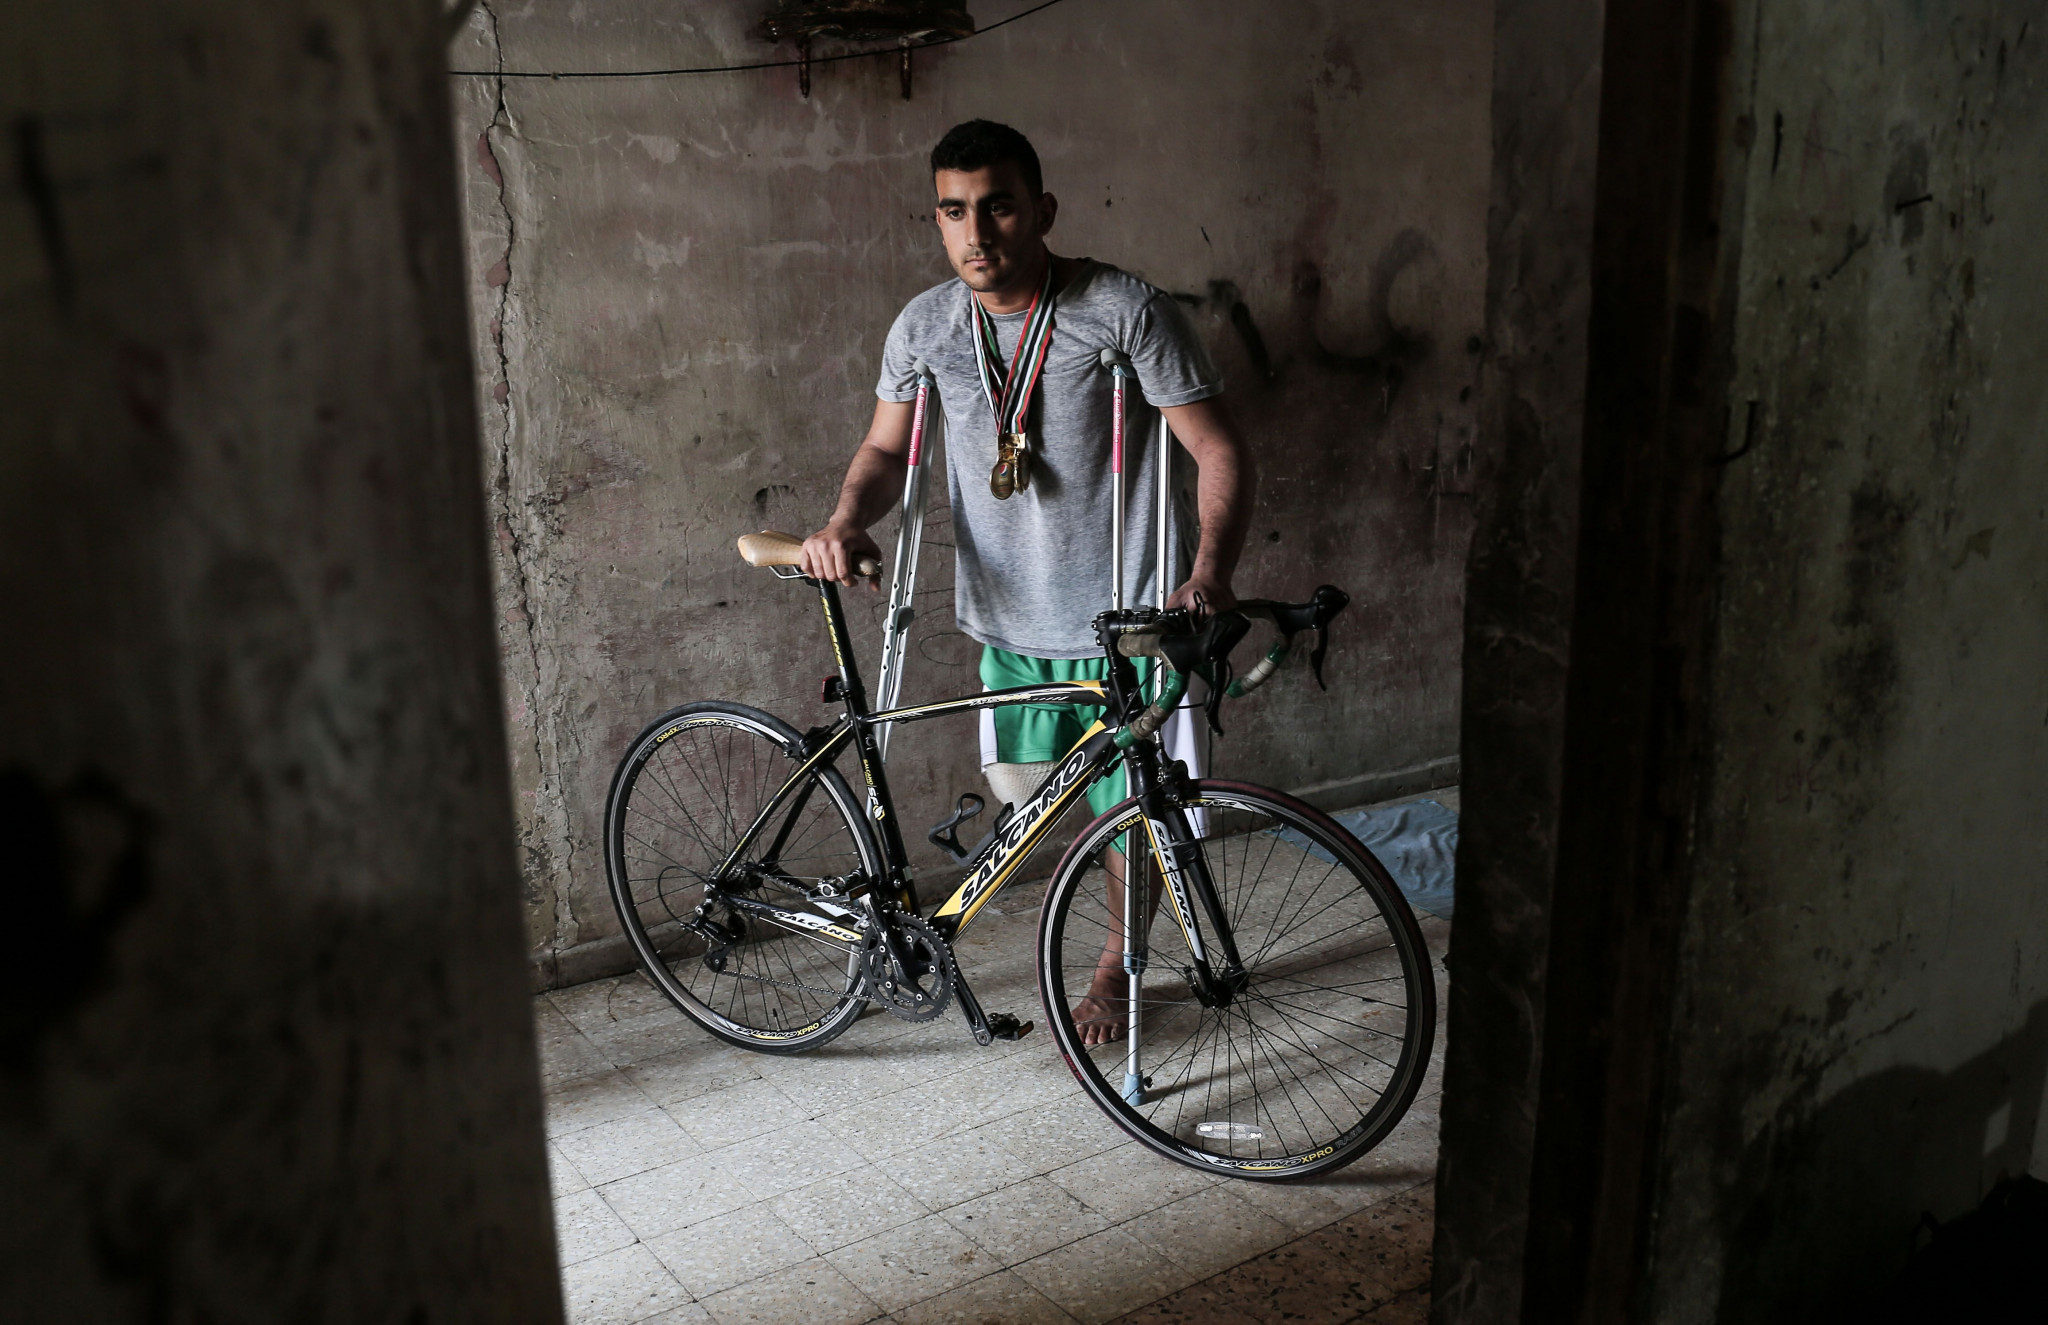 Palestinian cyclist shot in Gaza misses chance to compete at Asian Para Games